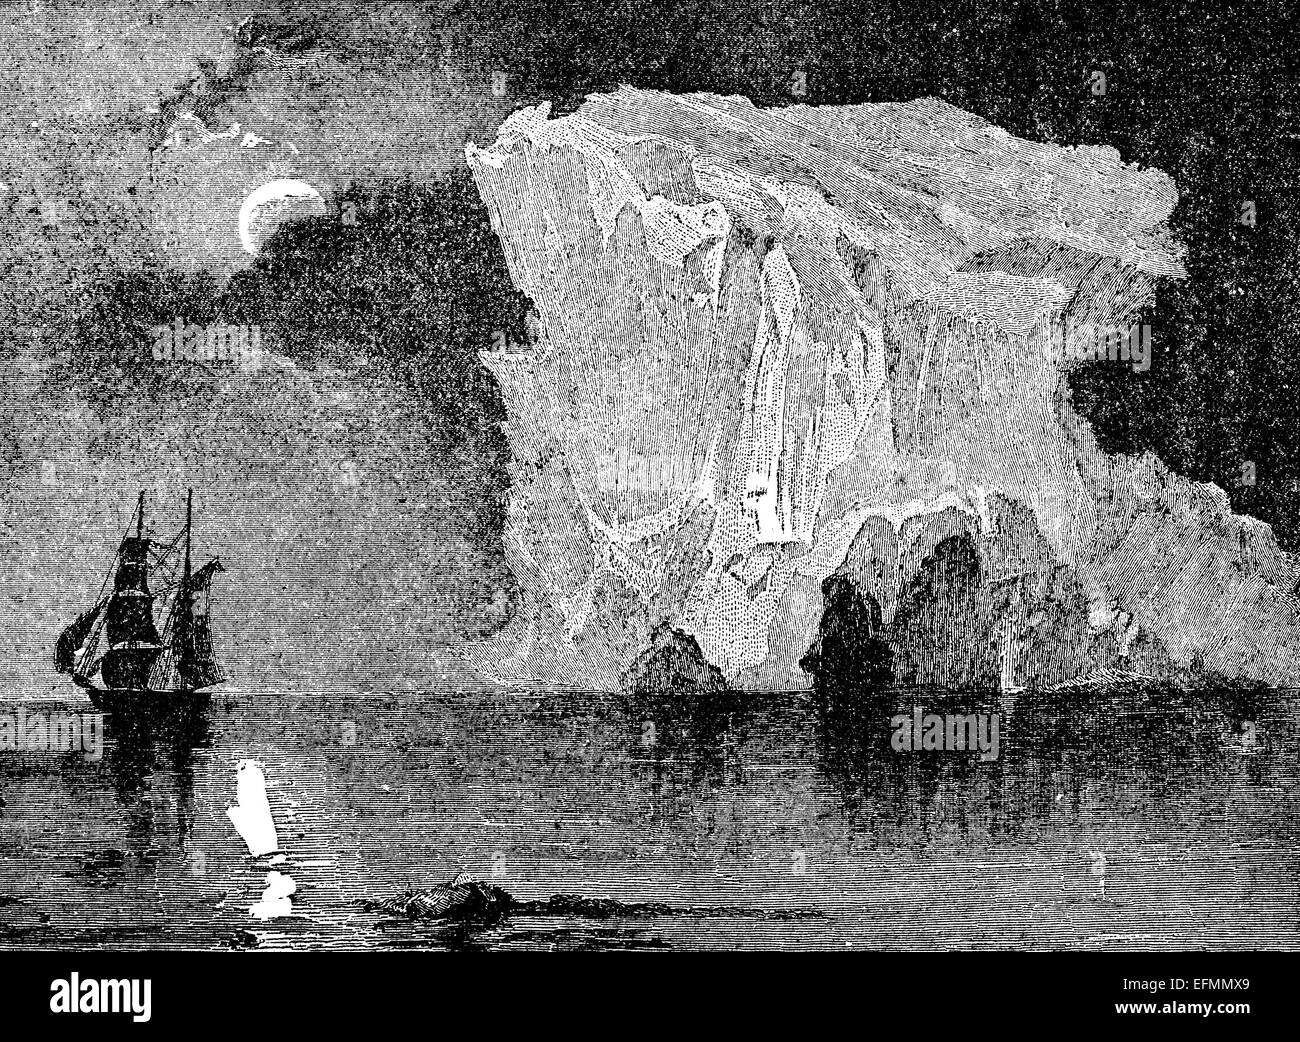 19th century engraving of the sea with a ship and an iceberg at night Stock Photo